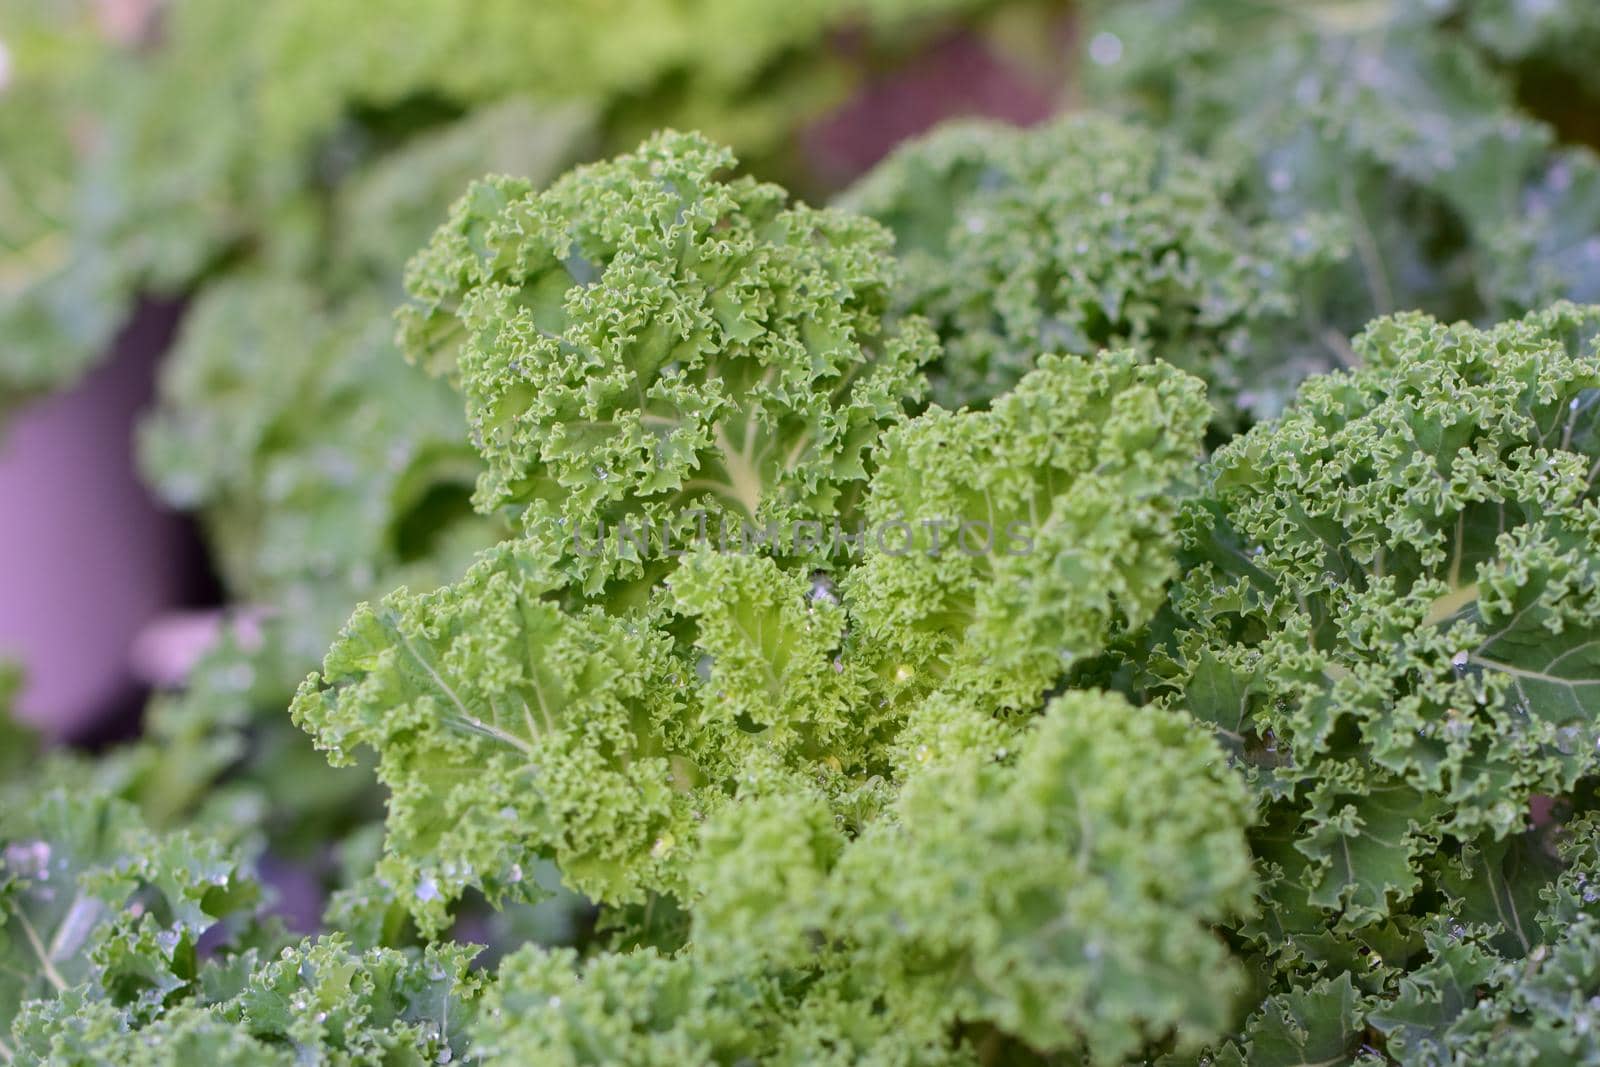 A close-up of wet green kale leaves